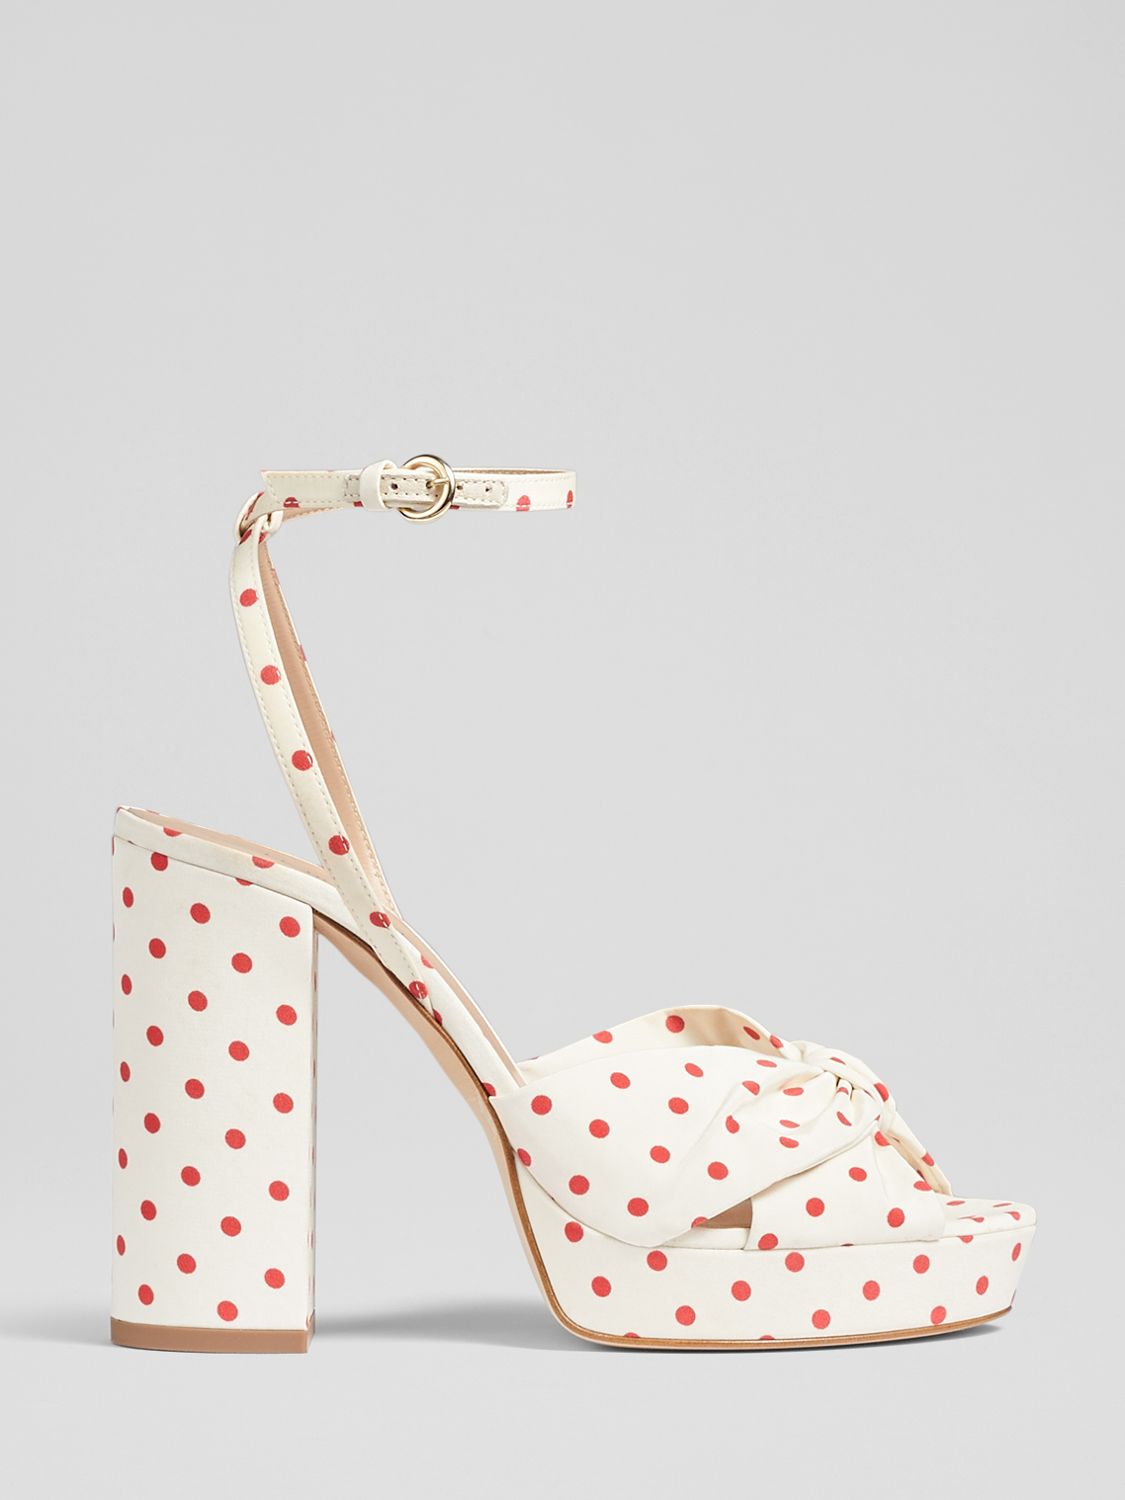 Red And White Polka Dot Heels Stock Photo - Download Image Now